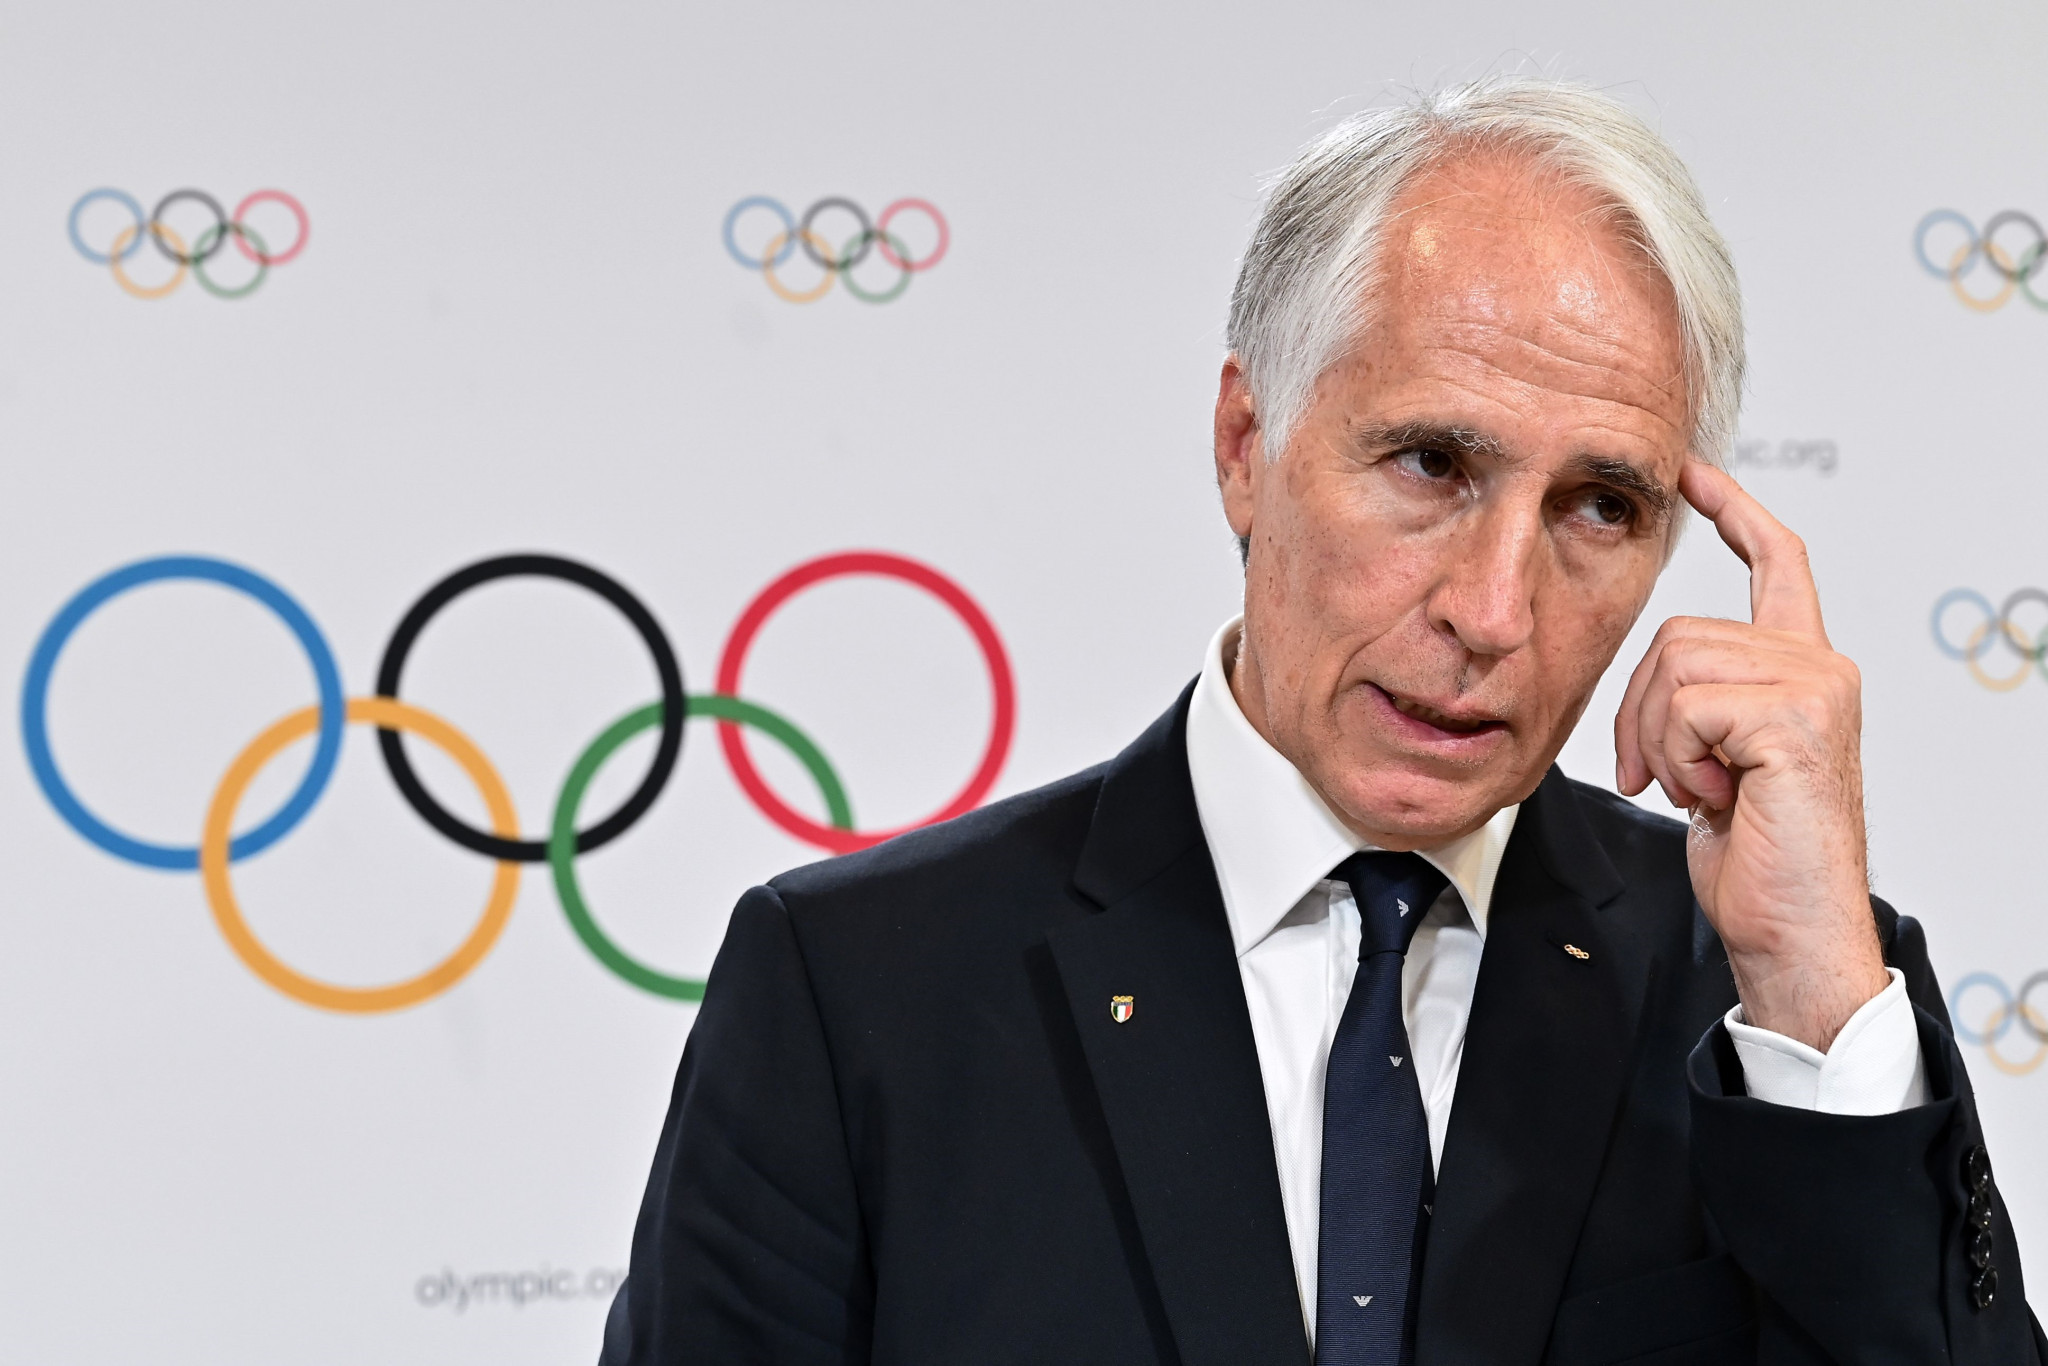 Milan Cortina 2026 President emphasises need for political "continuity" in Italy